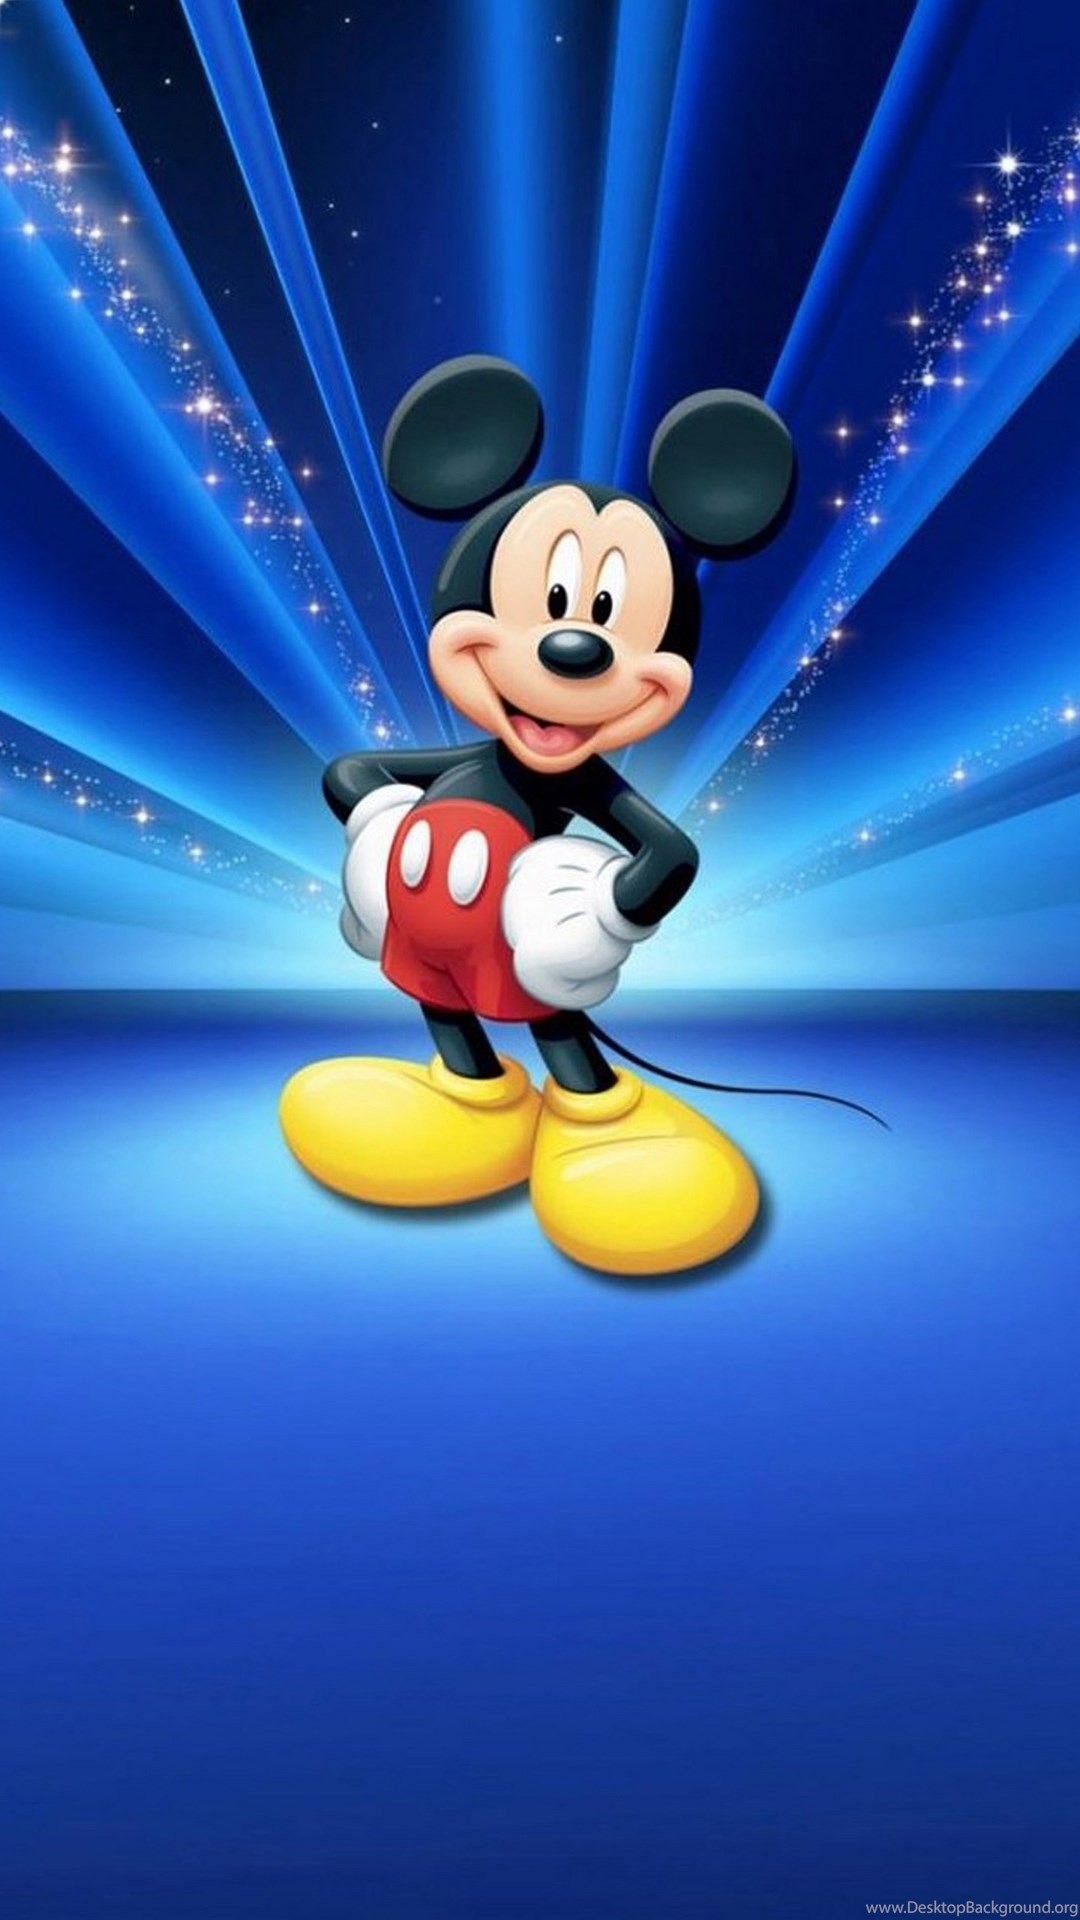 1080x1920 Samsung Galaxy A8 Wallpapers: Blue Mickey Mouse Android Wallpapers Desktop  Background